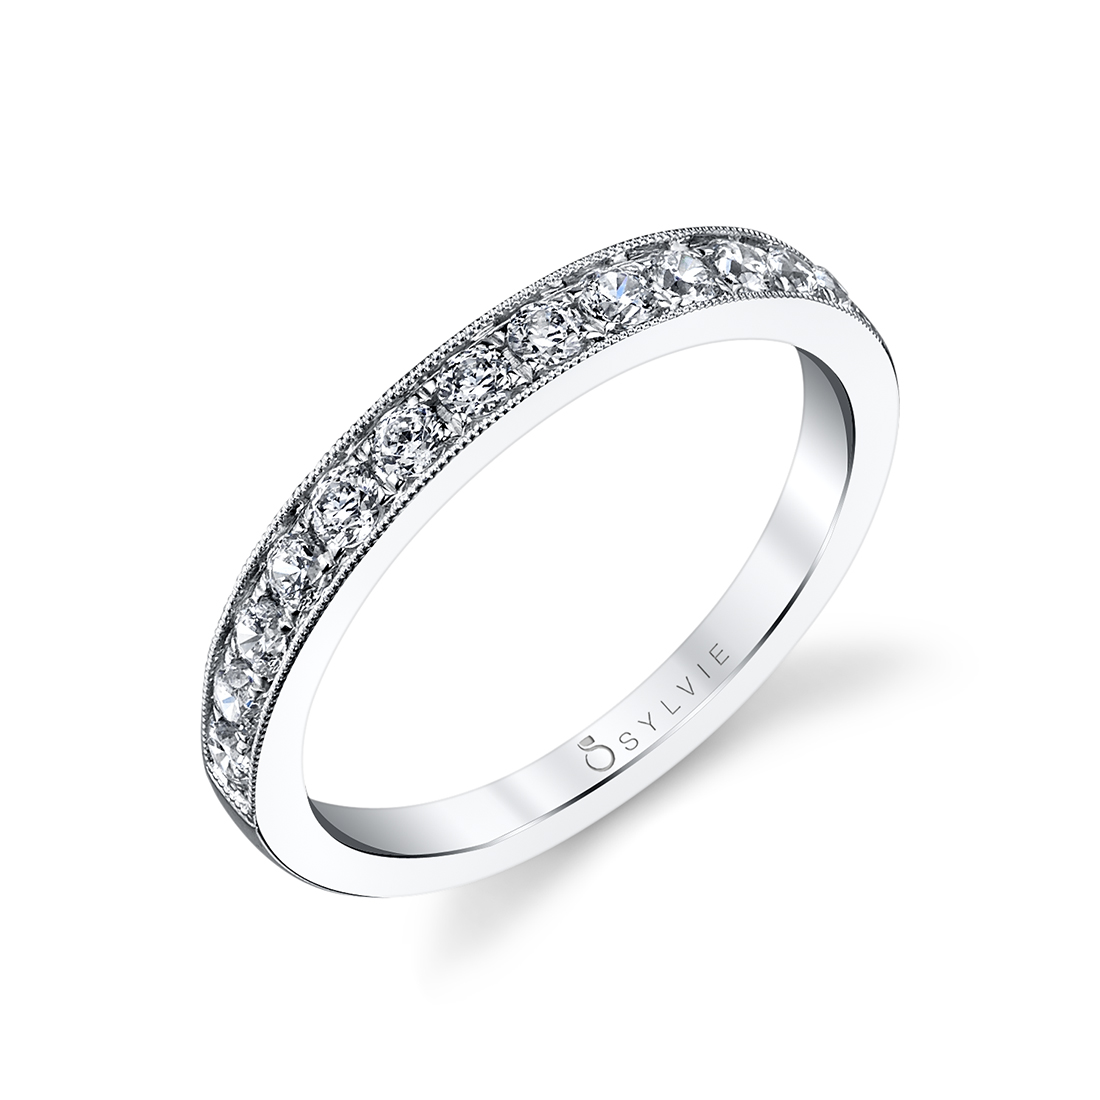 Profile Image of a Double Halo Engagement Ring